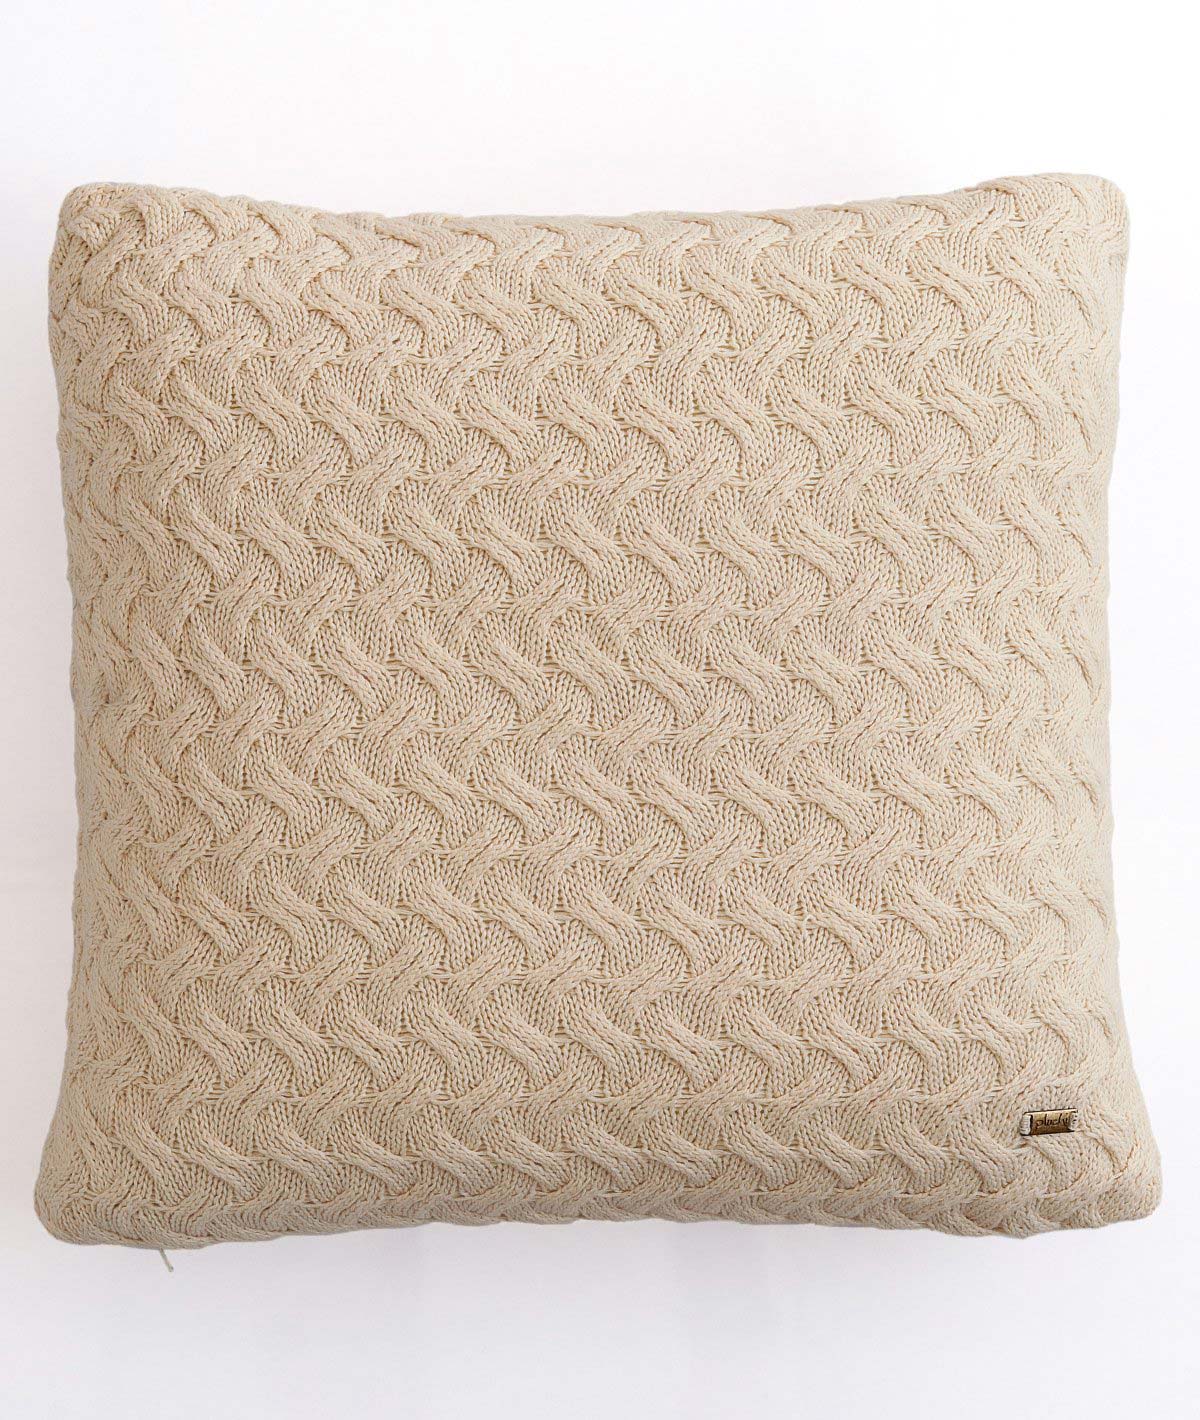 Criss Cross Cotton Knitted Decorative Natural Color 18 x 18 Inches Cushion Cover